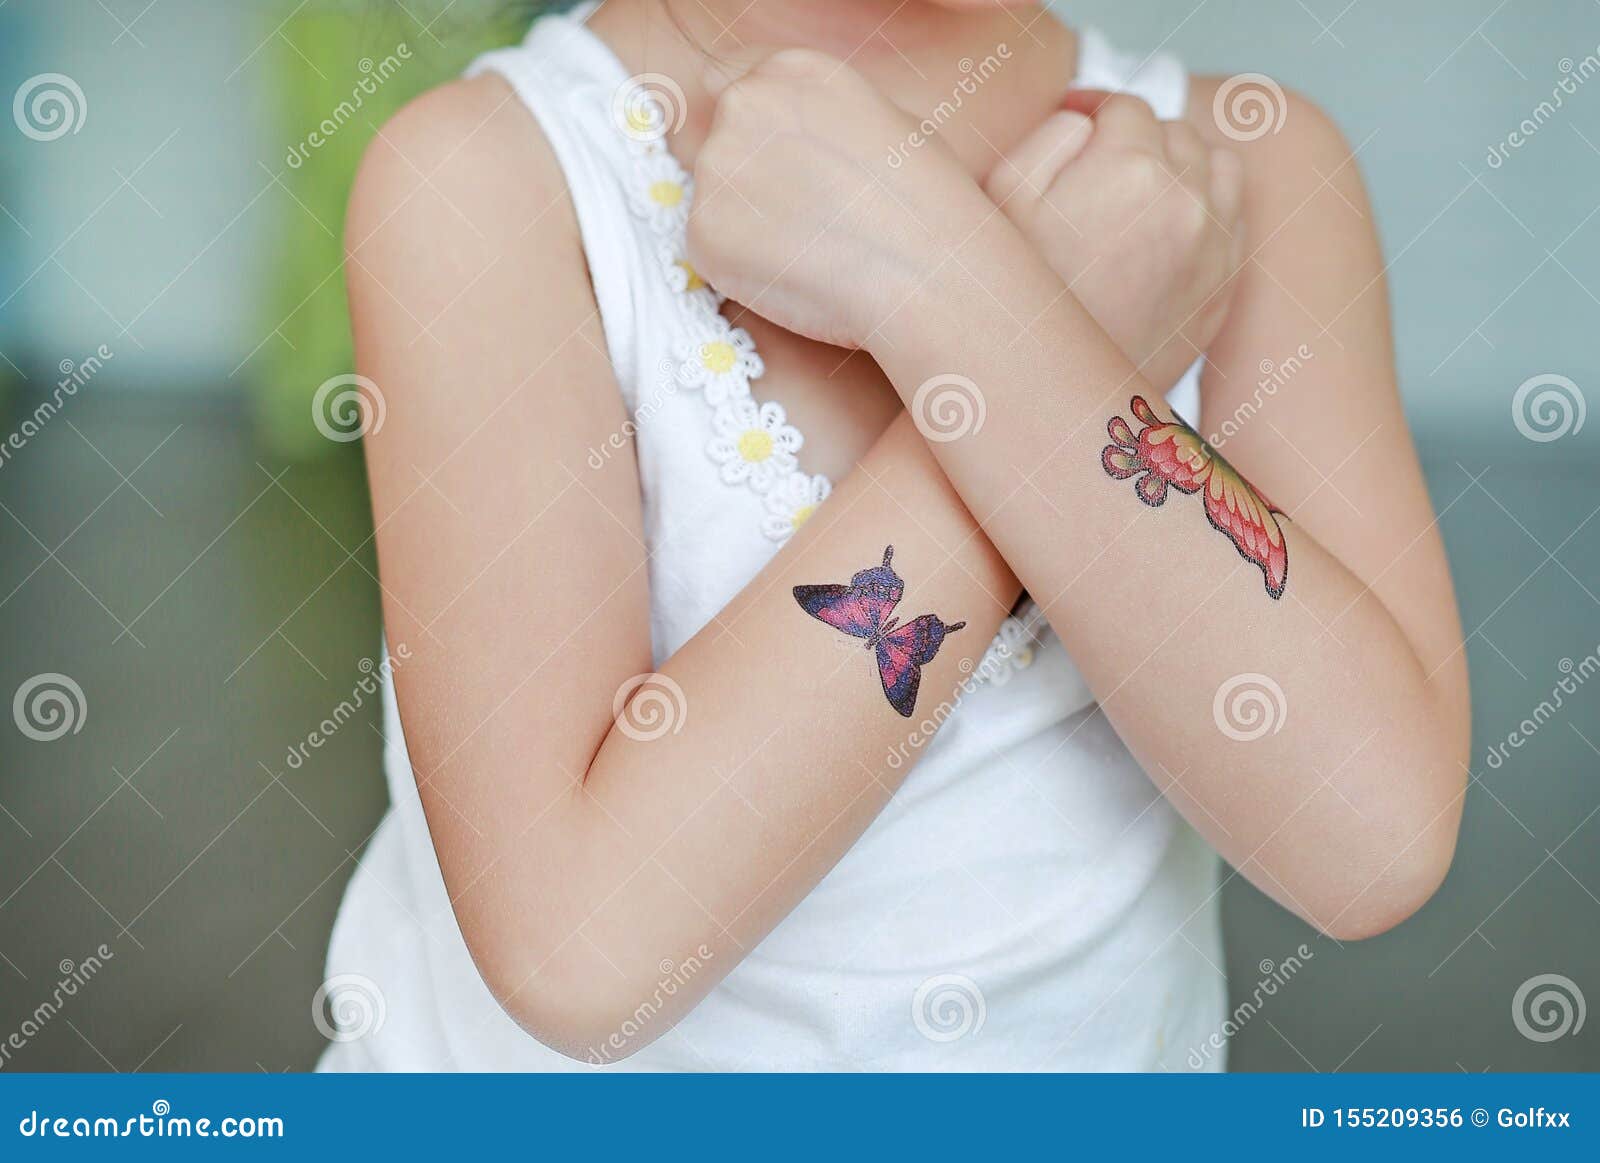 Butterfly Tattoos On Wrist Images Browse 29 Stock Photos  Vectors Free  Download with Trial  Shutterstock